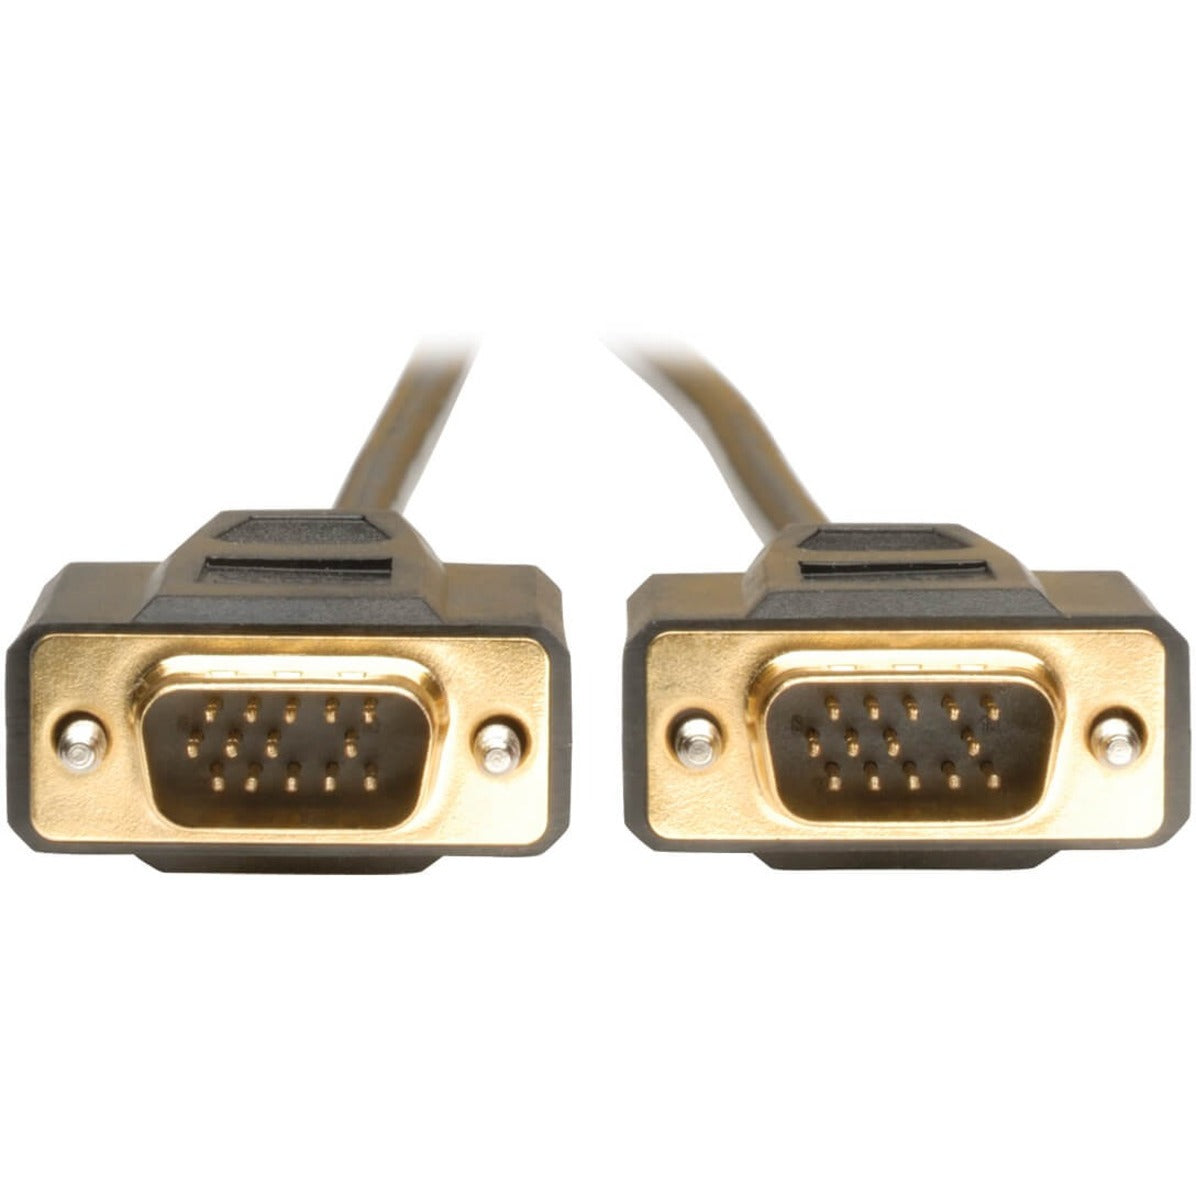 Tripp Lite P512-015 VGA Monitor Cable (HD15 M/M) 15-ft., Gold Plated Connectors, EMI Protection